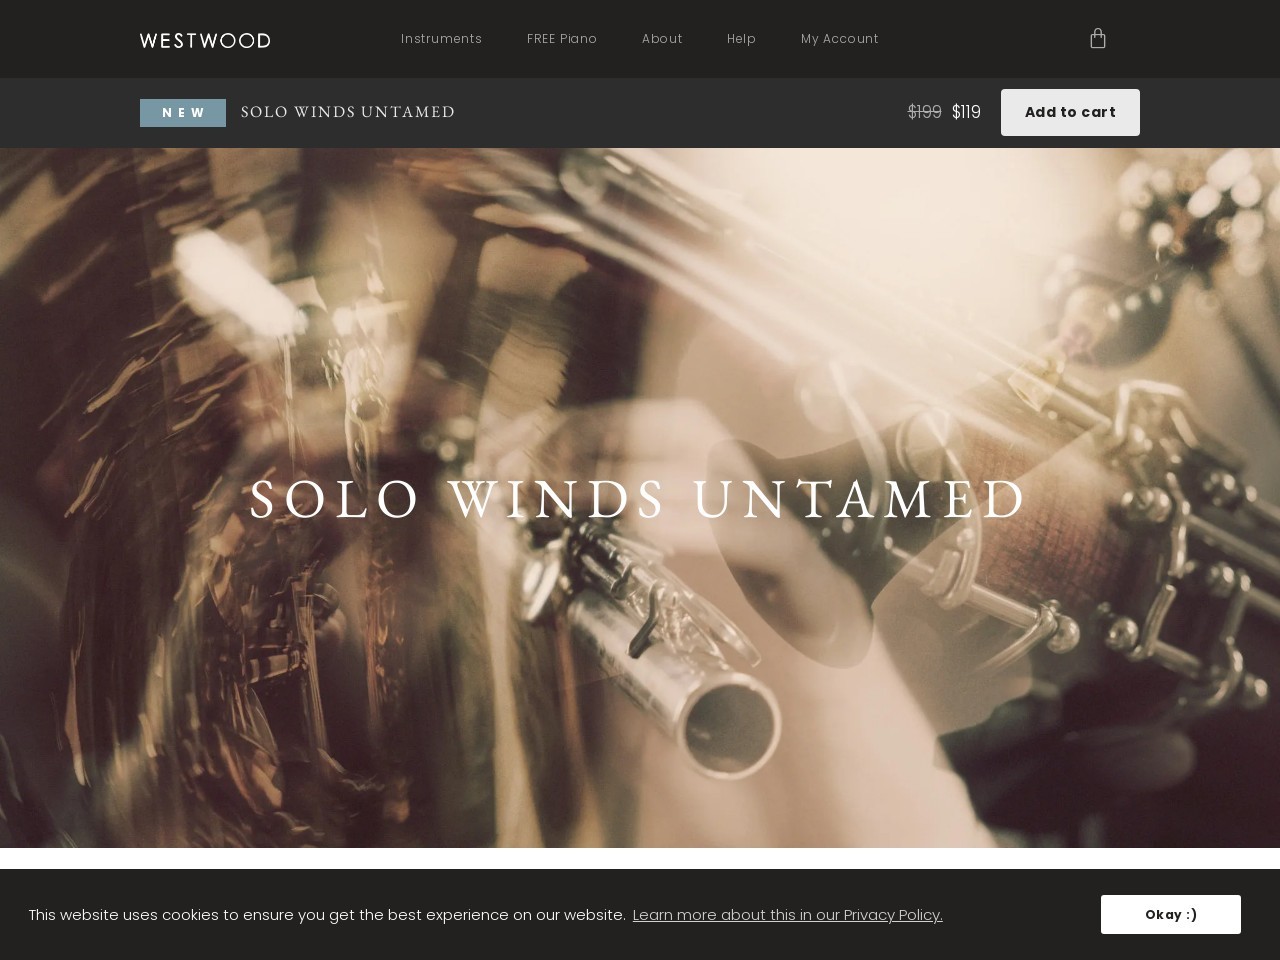 SOLO WINDS UNTAMED - Westwood Instruments